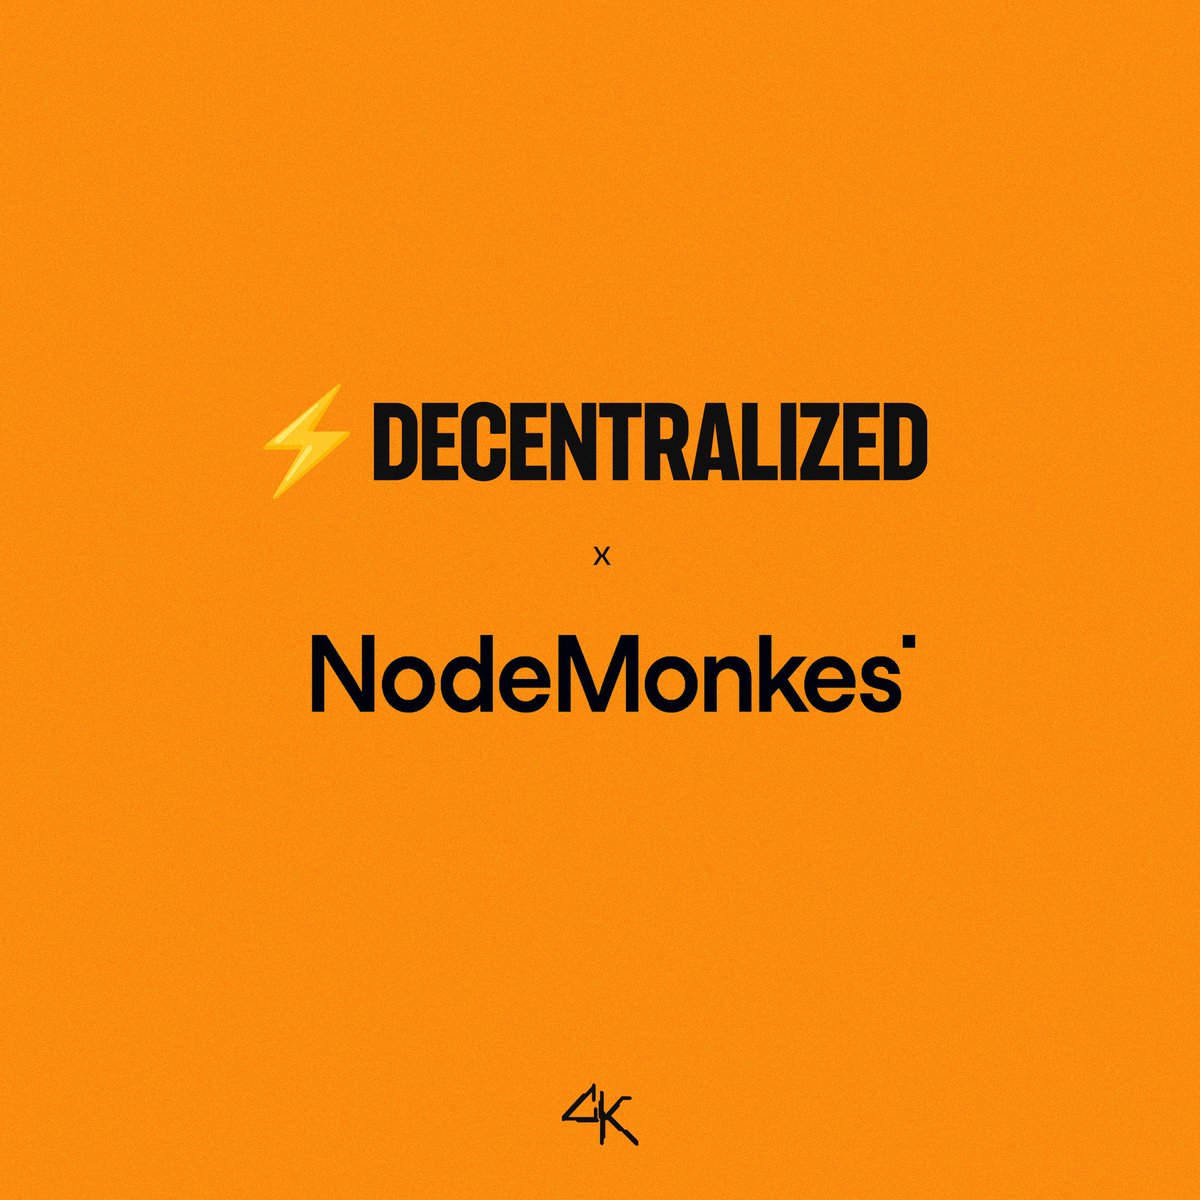 Welcome to ⚡️DECENTRALIZED, @nodemonkes.